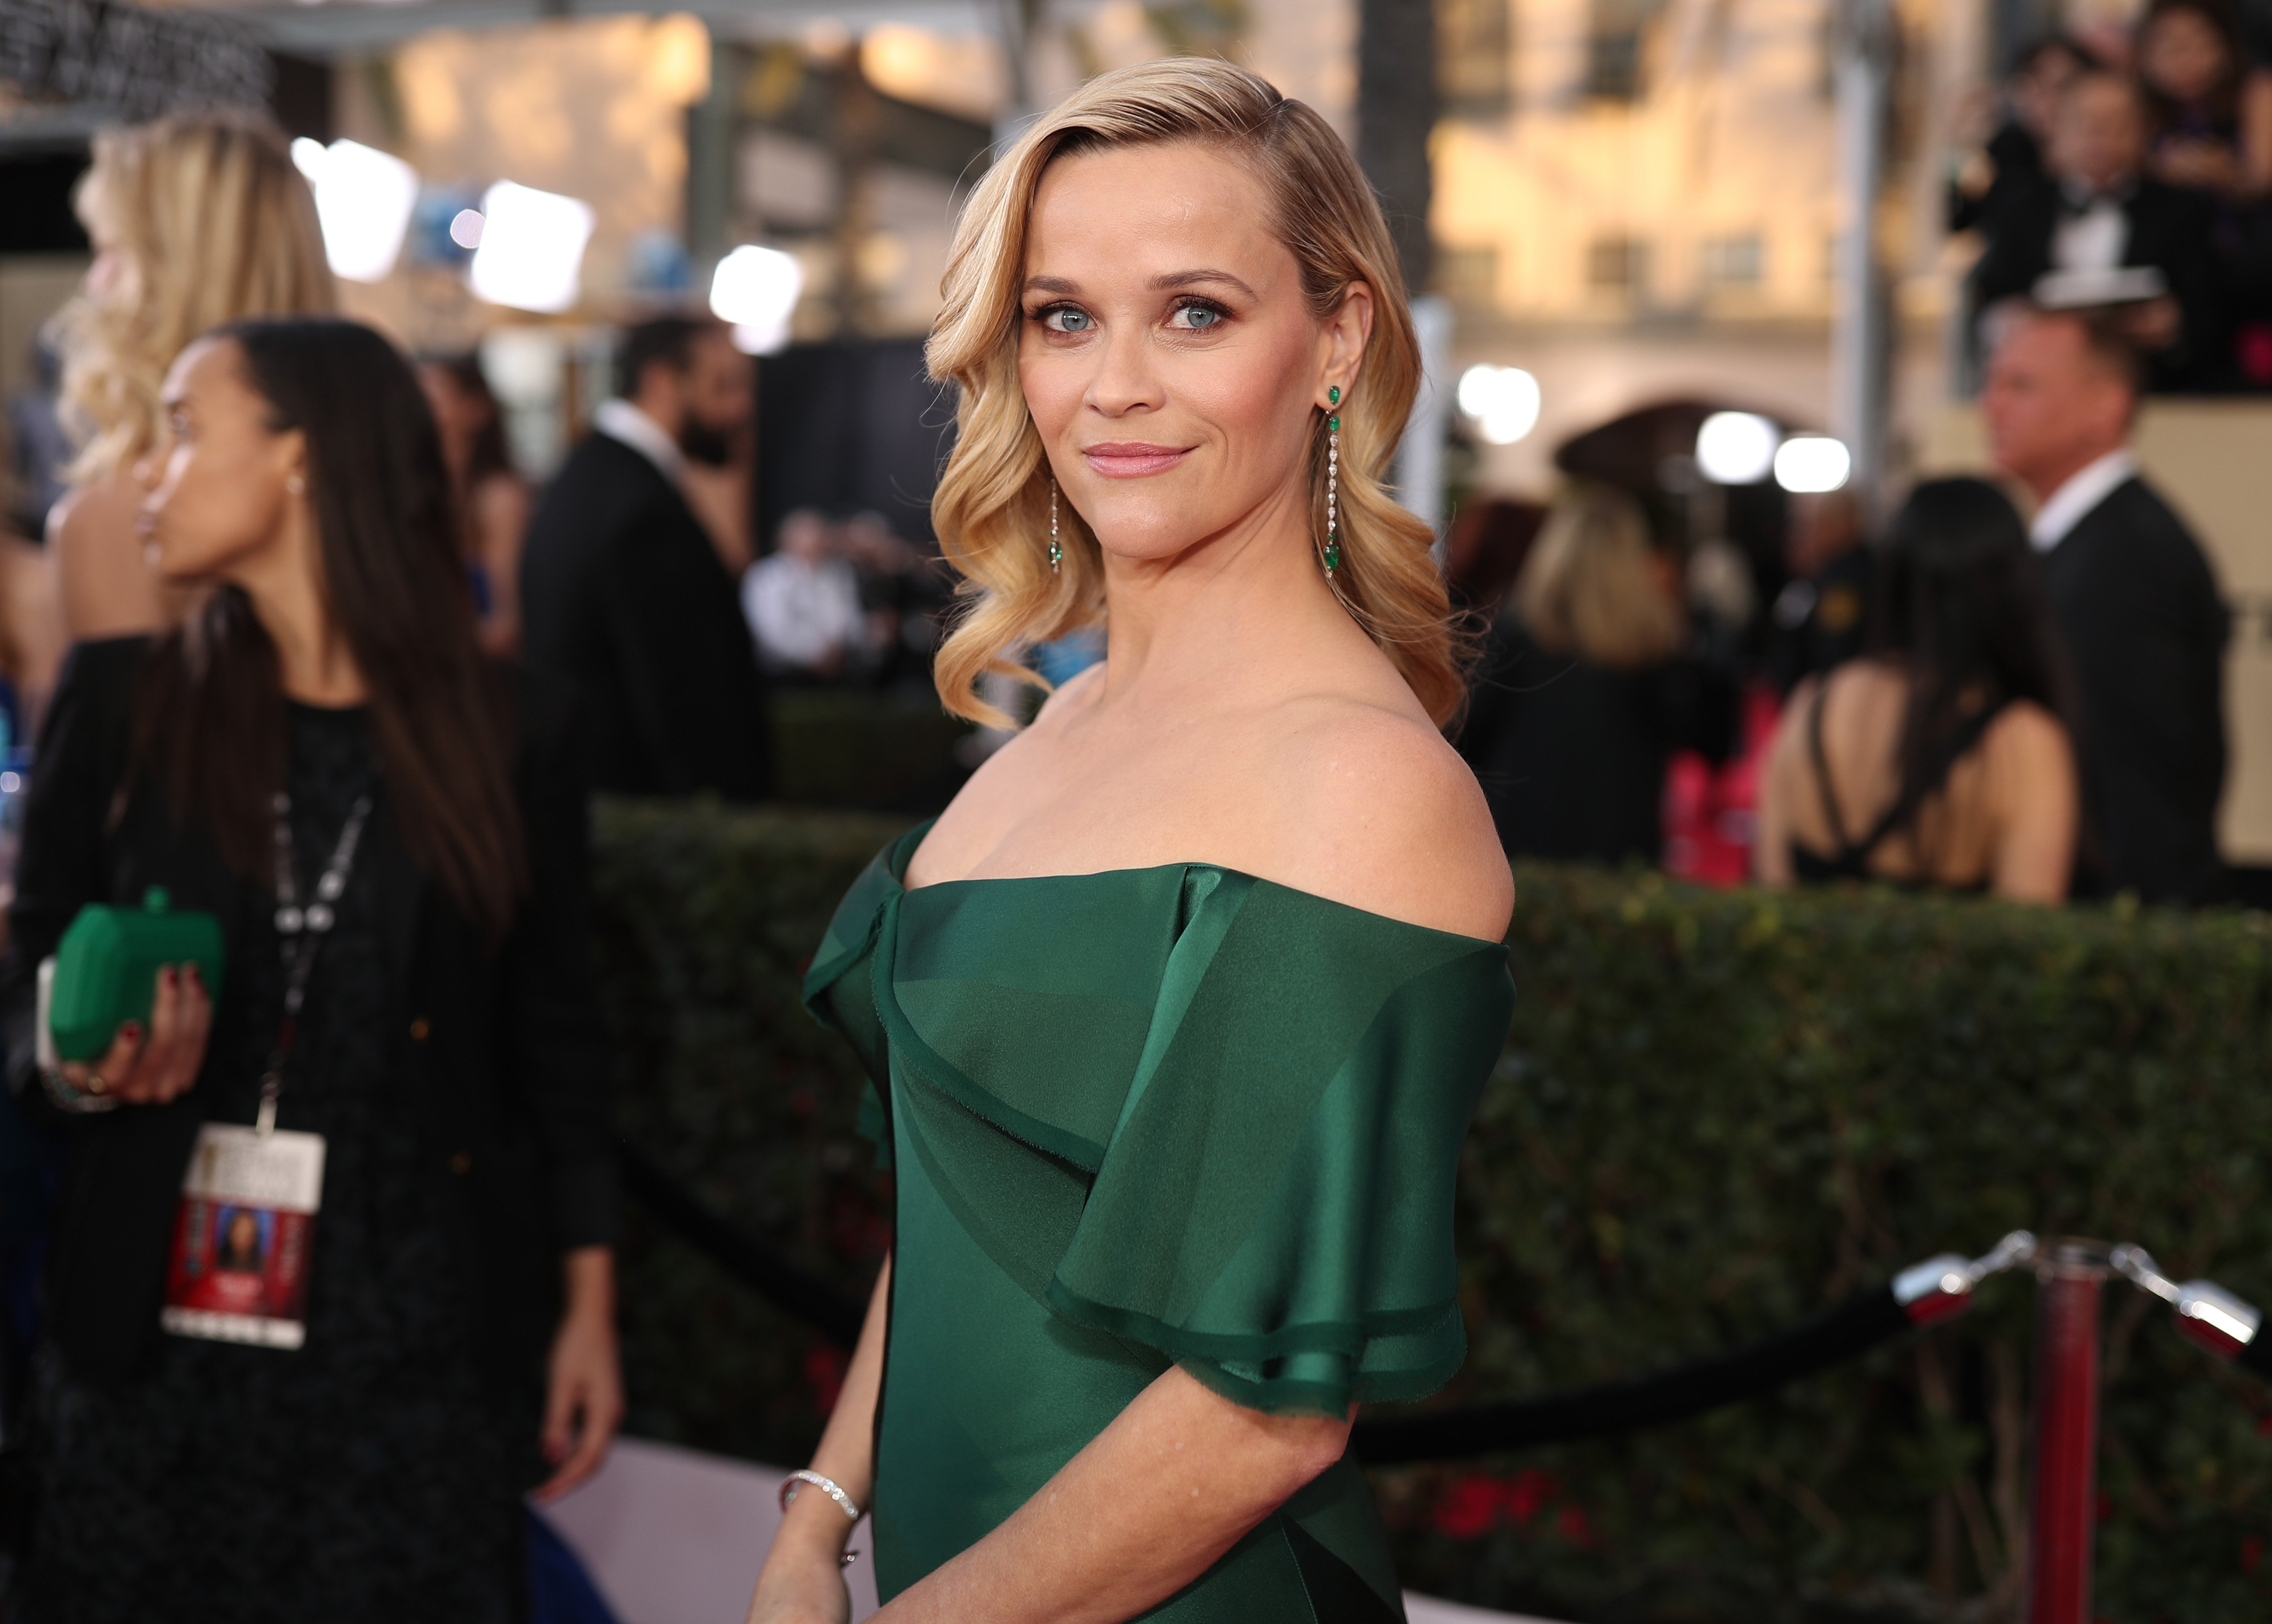 Reese Witherspoon, star of Your Place or Mine, smiles for the cameras at the Screen Actors Guild Awards